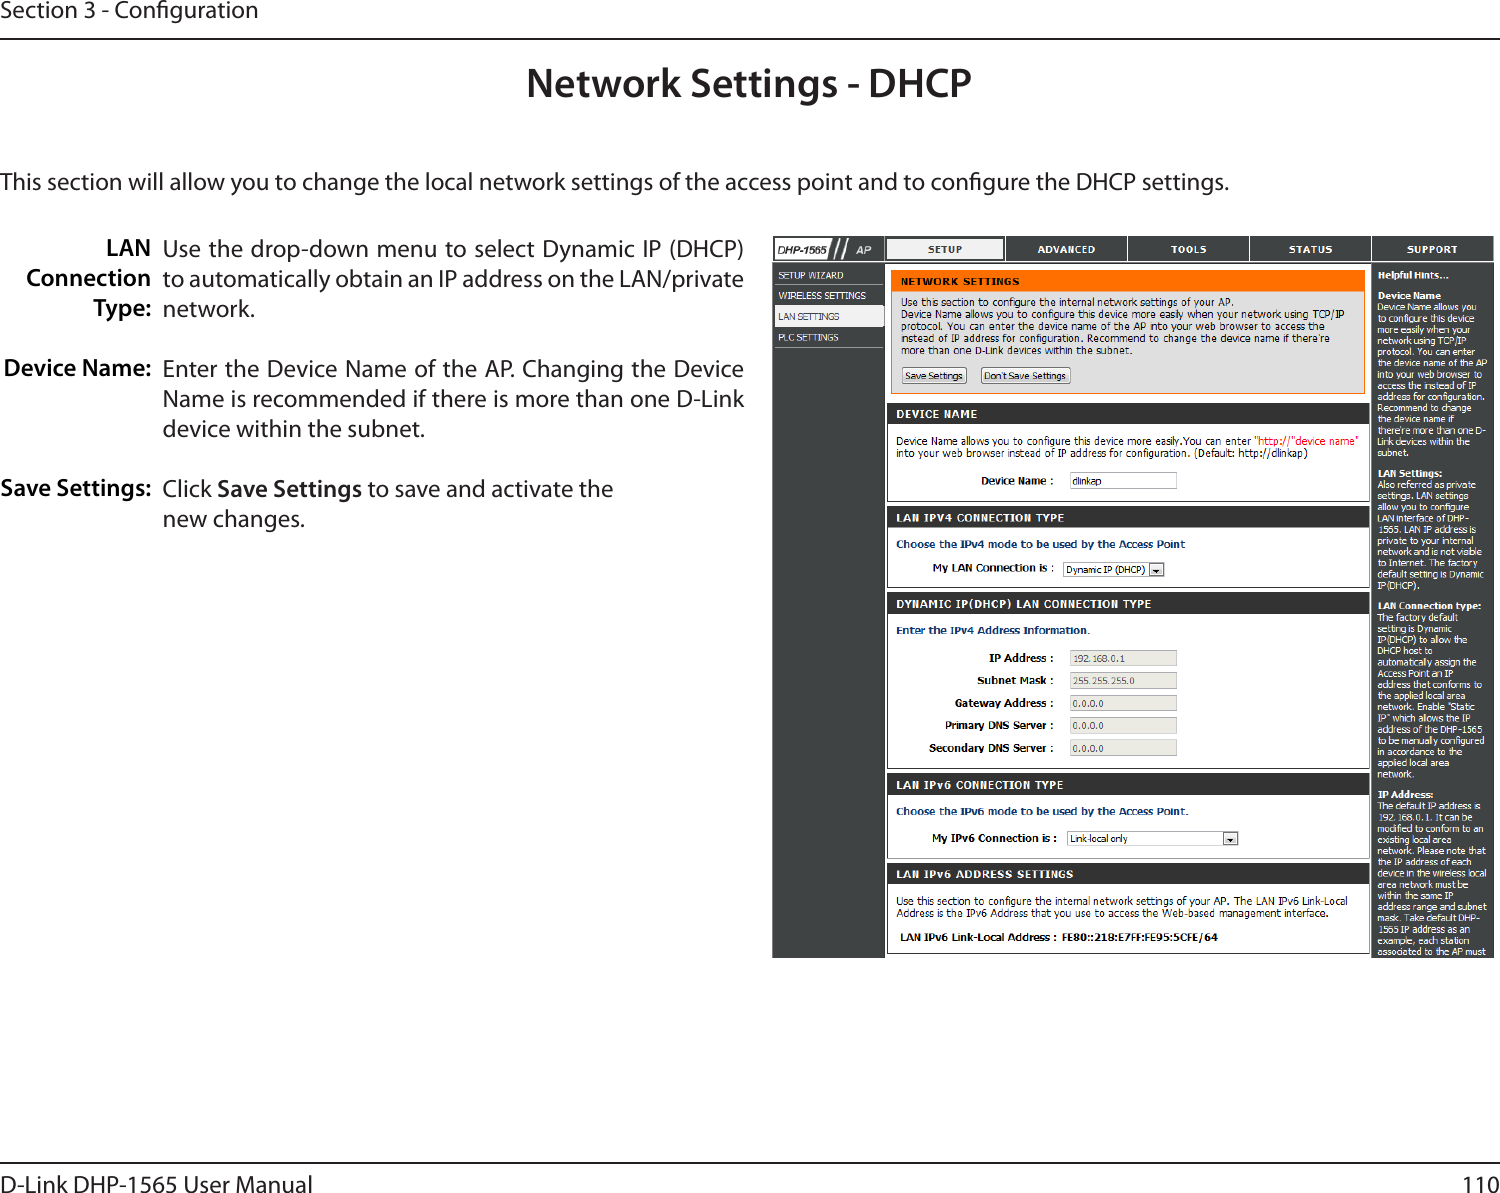 110D-Link DHP-1565 User ManualSection 3 - CongurationNetwork Settings - DHCPThis section will allow you to change the local network settings of the access point and to congure the DHCP settings.LAN ConnectionType:Device Name:Save Settings:Use the drop-down menu to select Dynamic IP (DHCP) to automatically obtain an IP address on the LAN/private network.Enter the Device Name of the AP. Changing the Device Name is recommended if there is more than one D-Link device within the subnet.Click Save Settings to save and activate thenew changes.